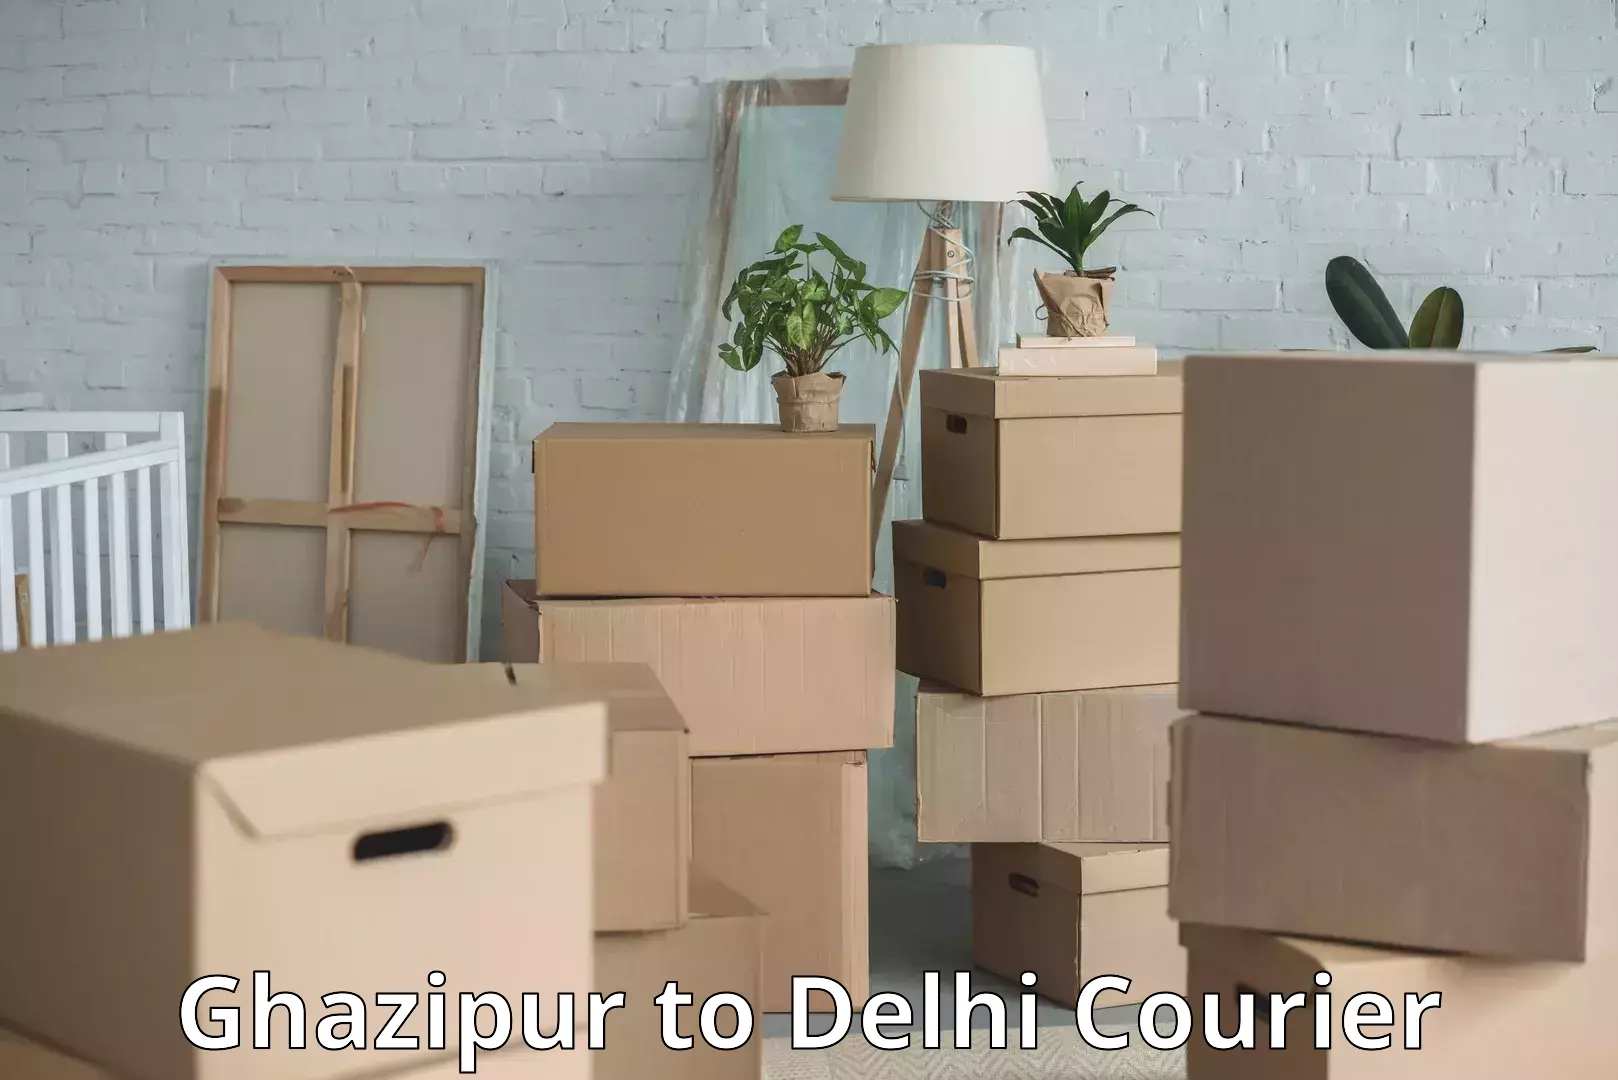 Luggage shipment specialists Ghazipur to Delhi